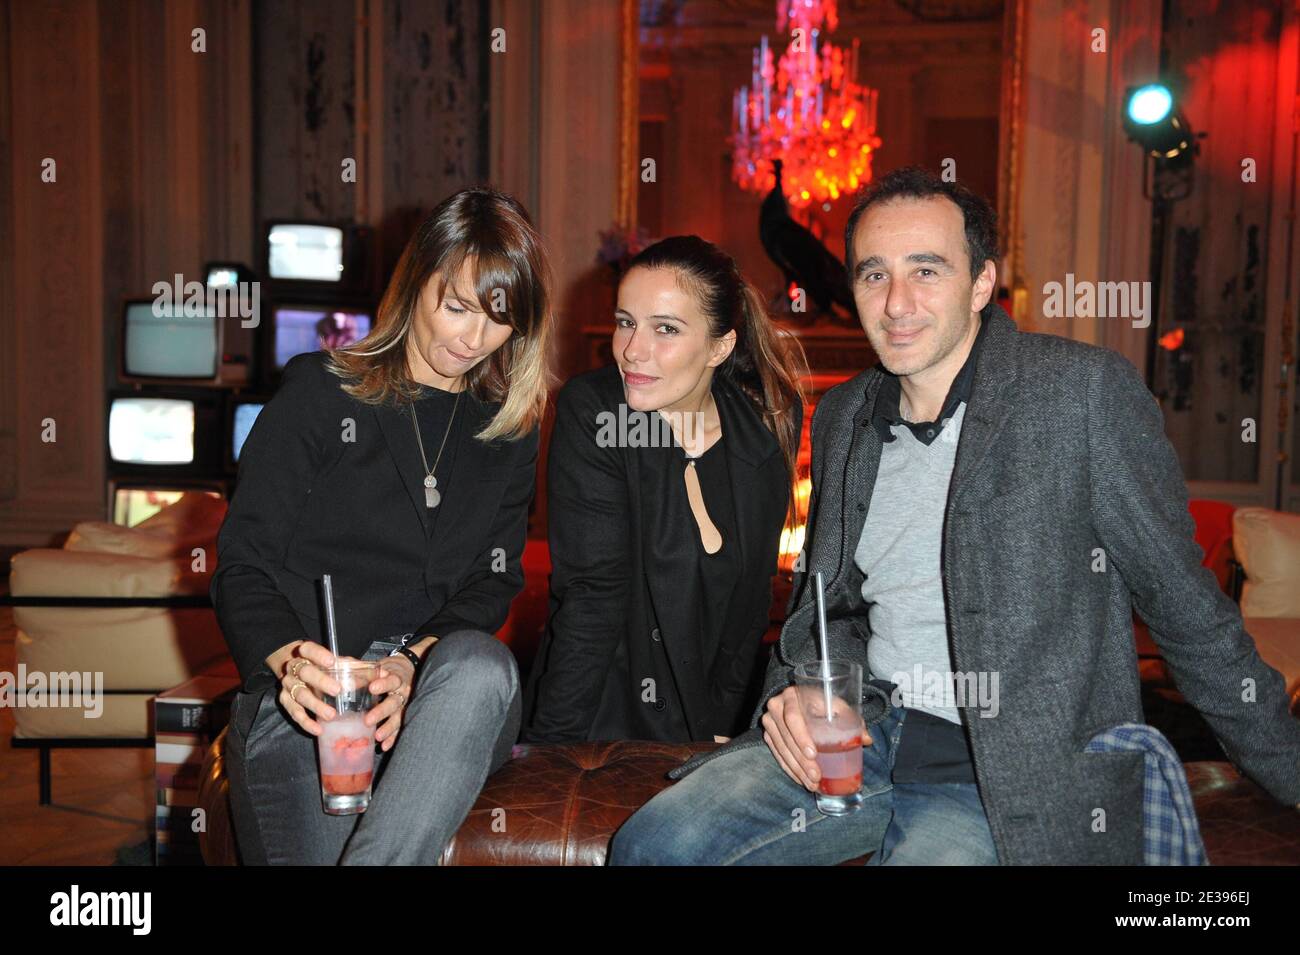 Axelle Laffont, Zoe Felix and Elie Semoun attending the 'Fast Retailing'  party at Hotel Salomon de Rothschild in Paris, France on September 30,  2010. Photo by Thierry Orban/ABACAPRESS.COM Stock Photo - Alamy